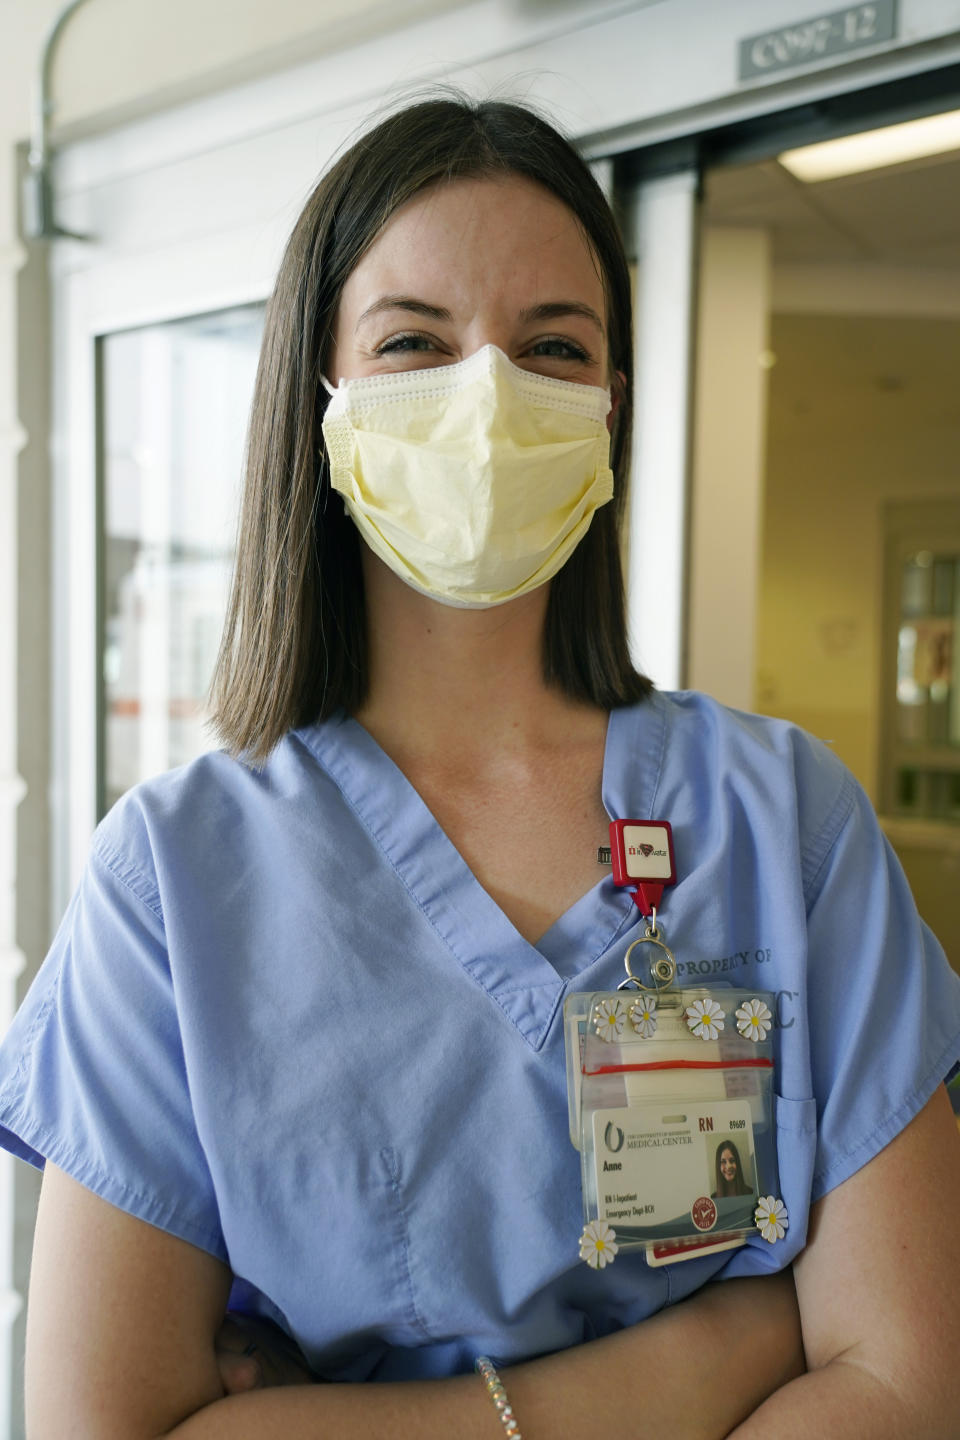 Anne Sinclair, a pediatric emergency room nurse at the University of Mississippi Medical Center, in Jackson, wonders why some incoming patients and their parents have to be reminded to wear masks when they come to the hospital, Wednesday, Aug. 25, 2021. A mother of two young children, Sinclair is tired of the covid misinformation she deals with having seen children in her unit die of the virus. (AP Photo/Rogelio V. Solis)